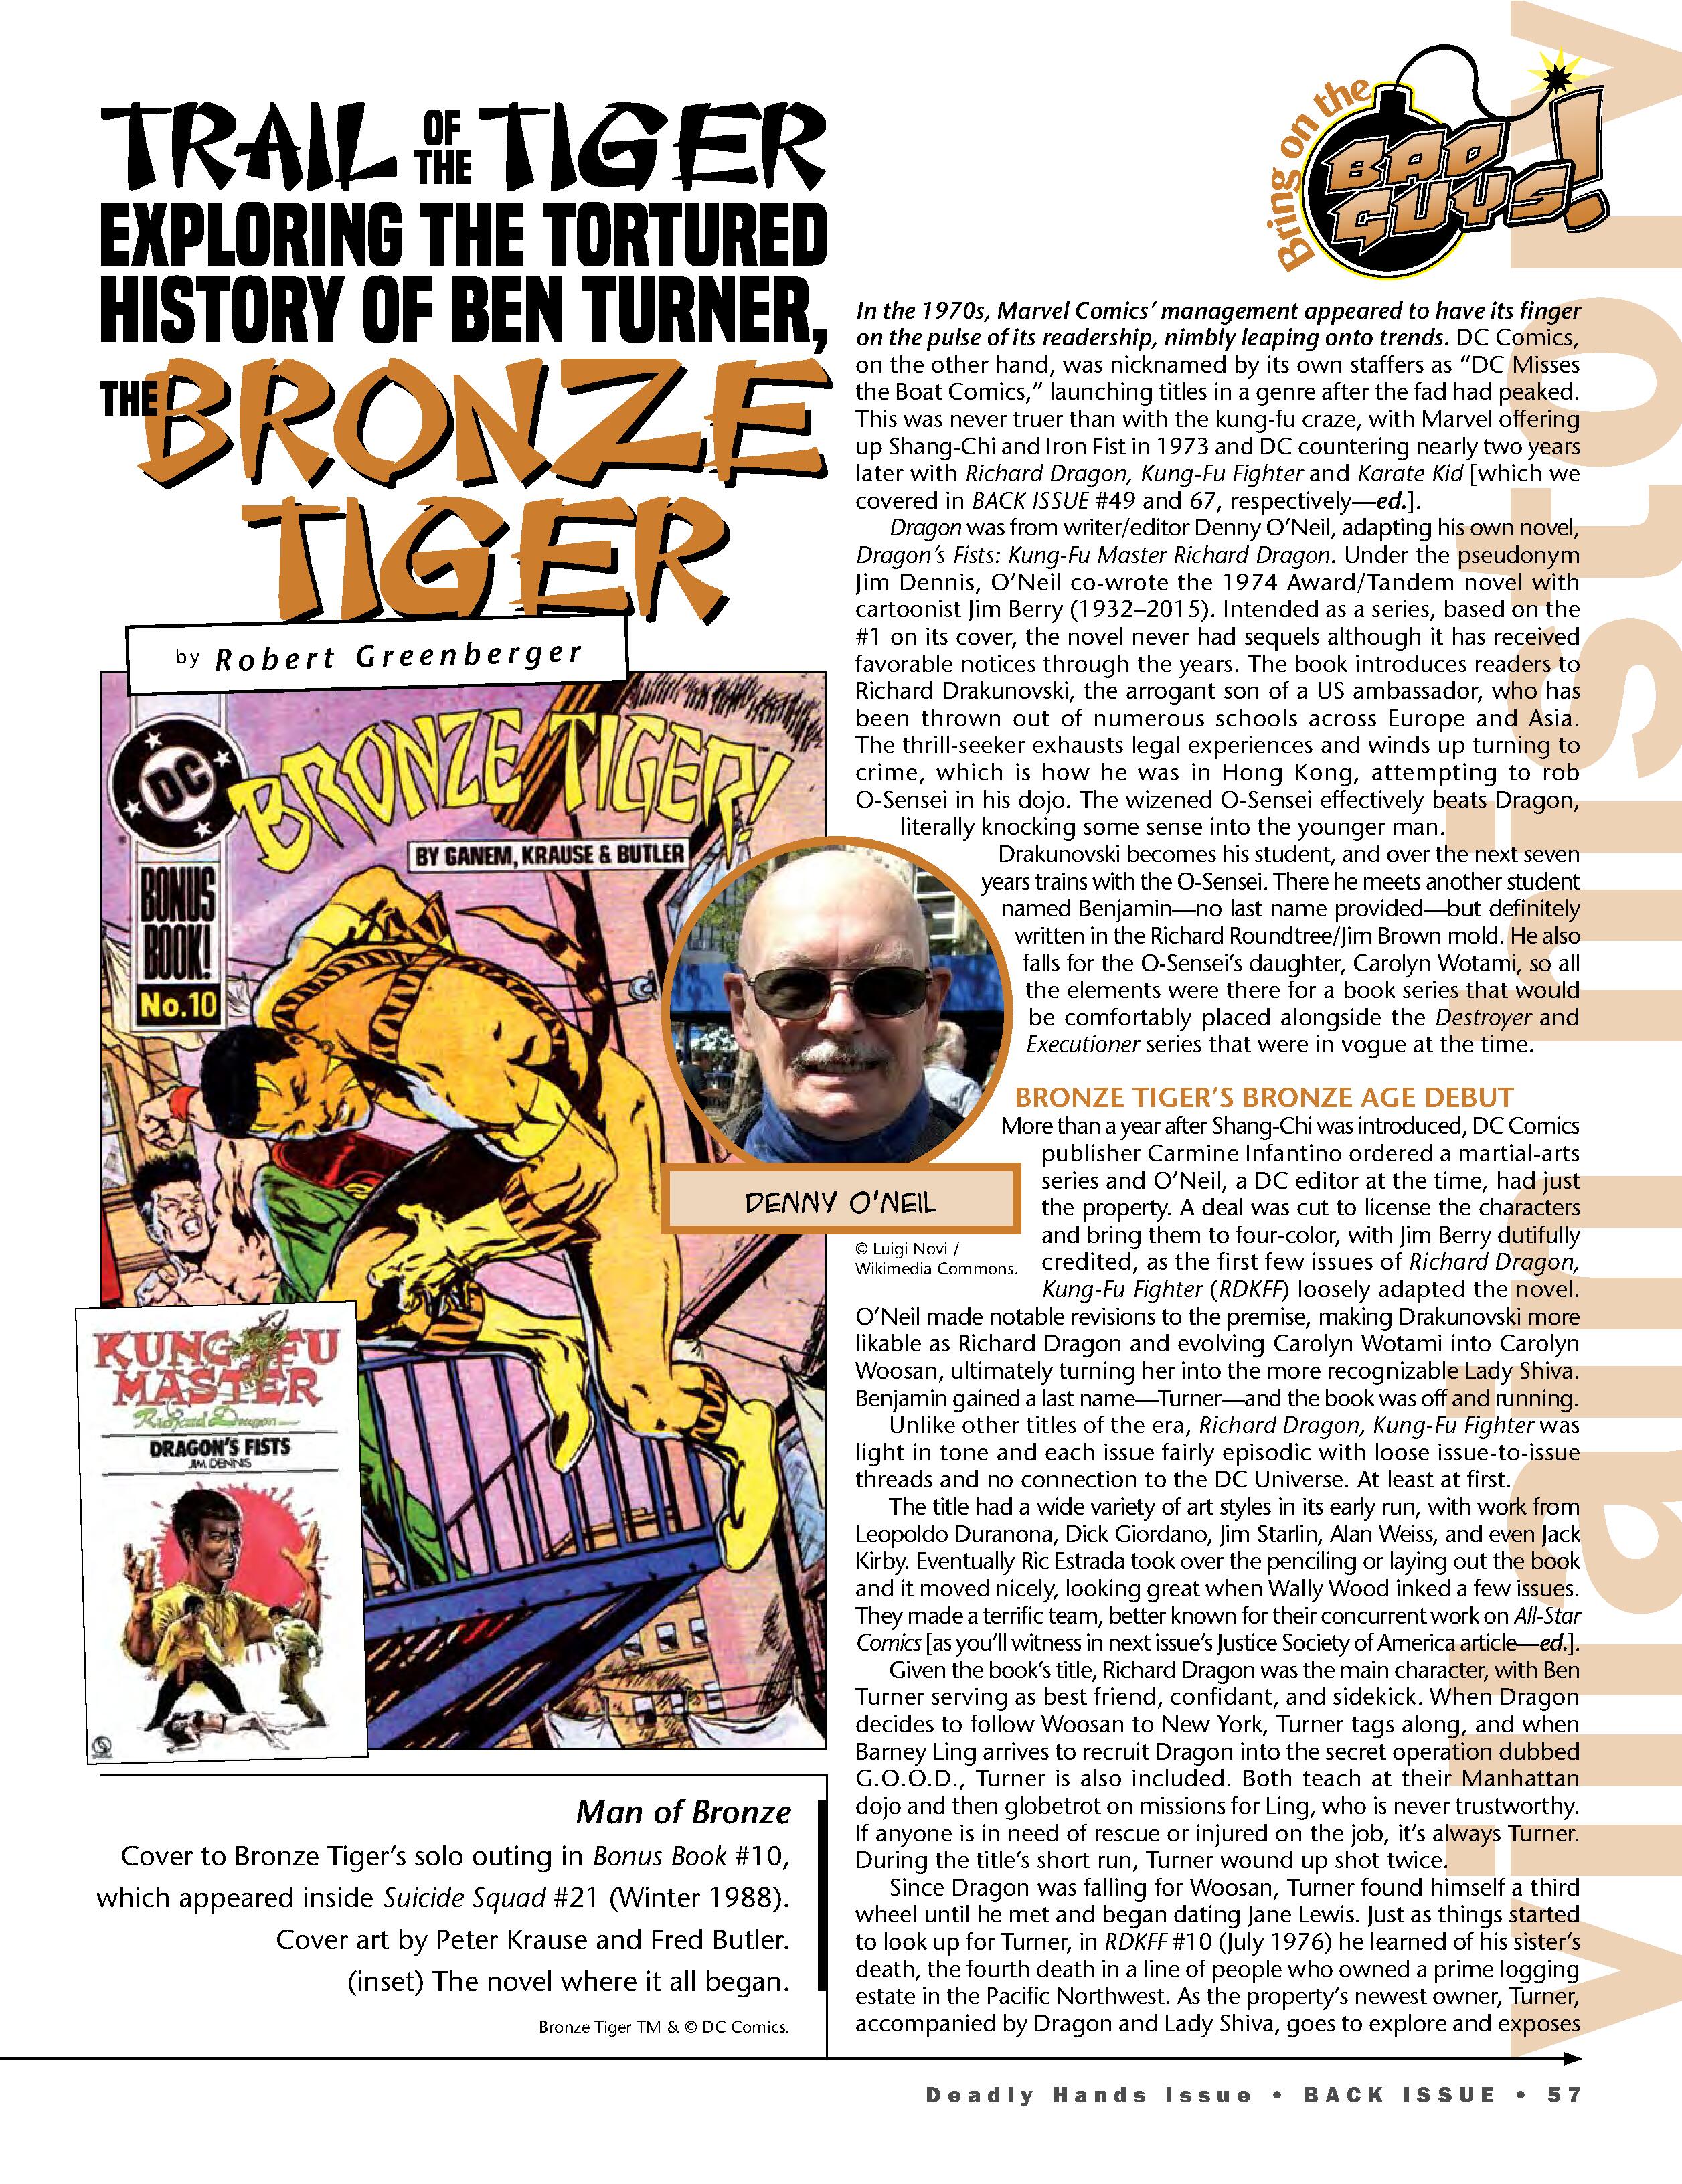 Read online Back Issue comic -  Issue #105 - 59